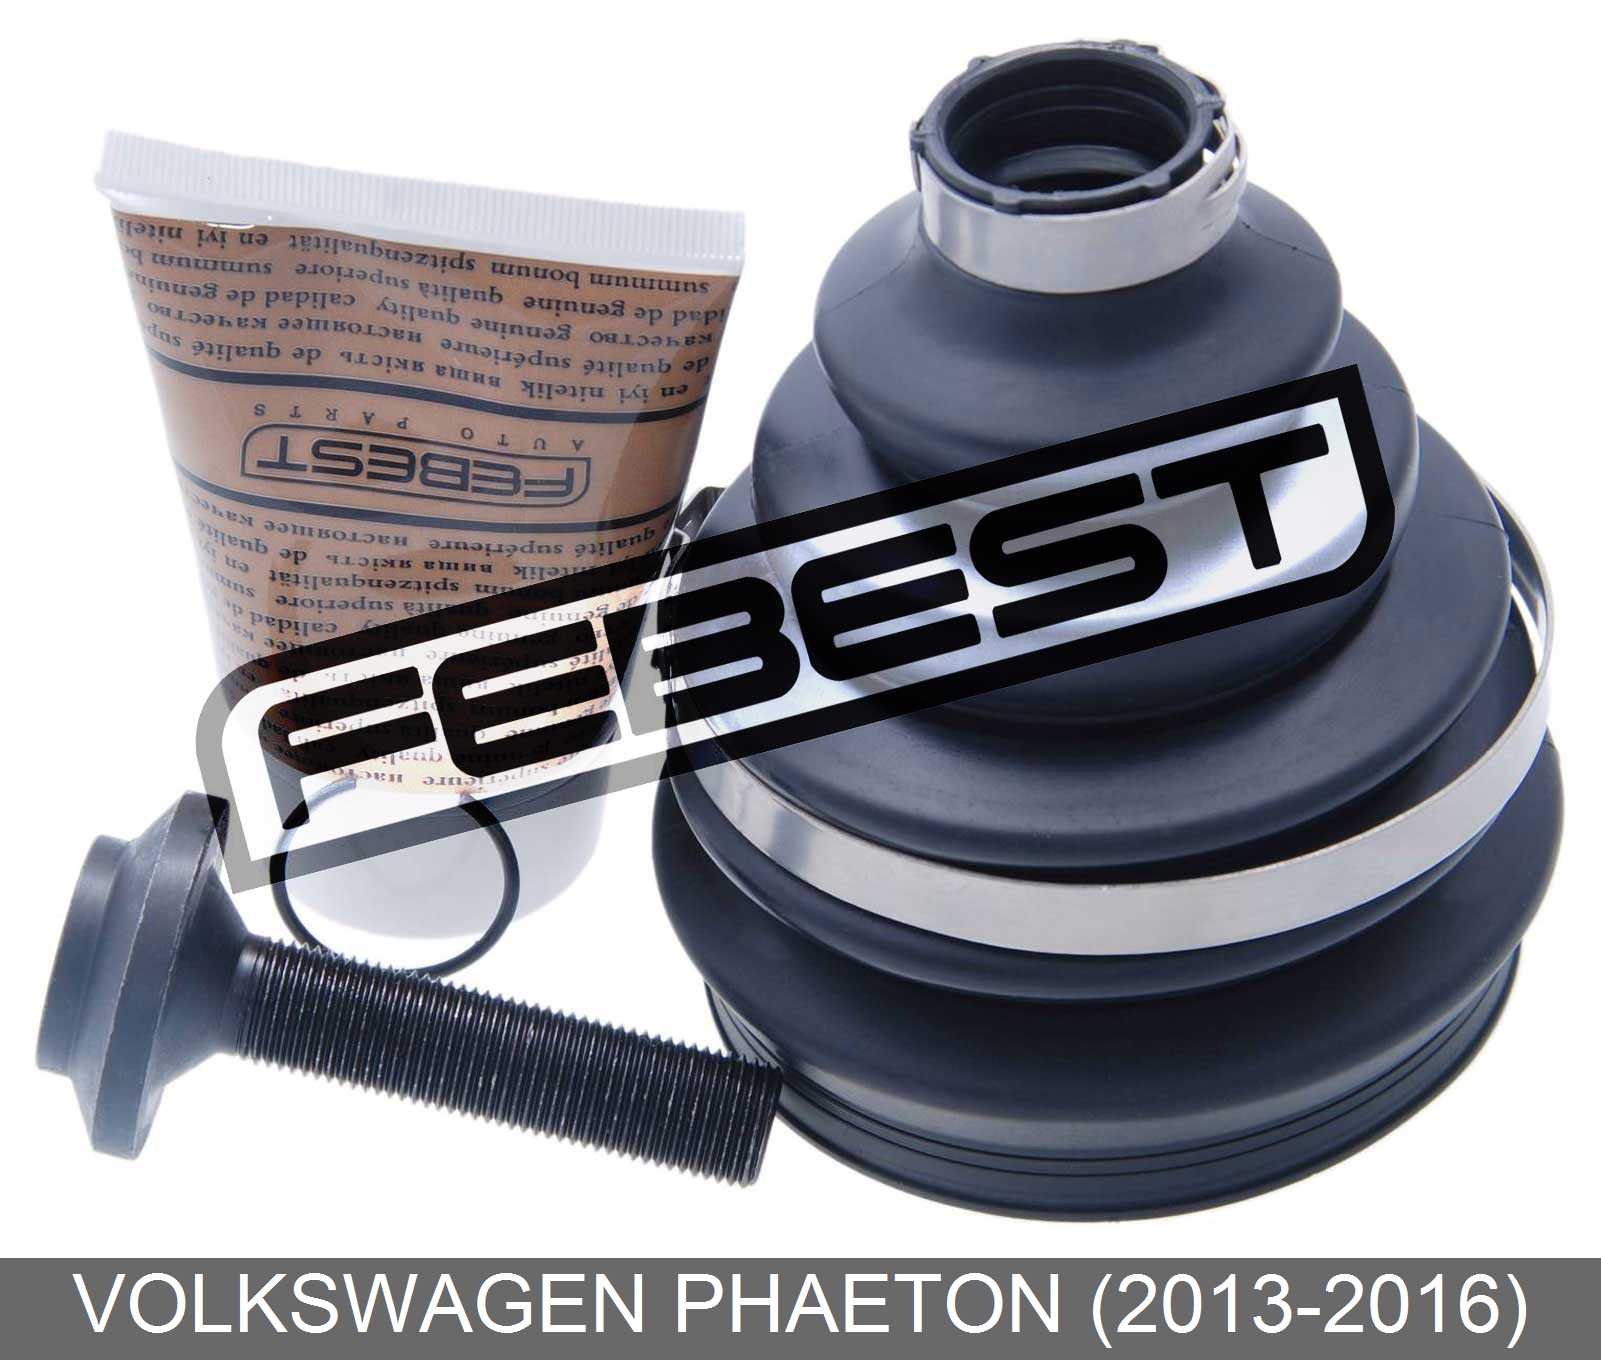 VOLKSWAGEN 1717P-A6_IV Product Photo